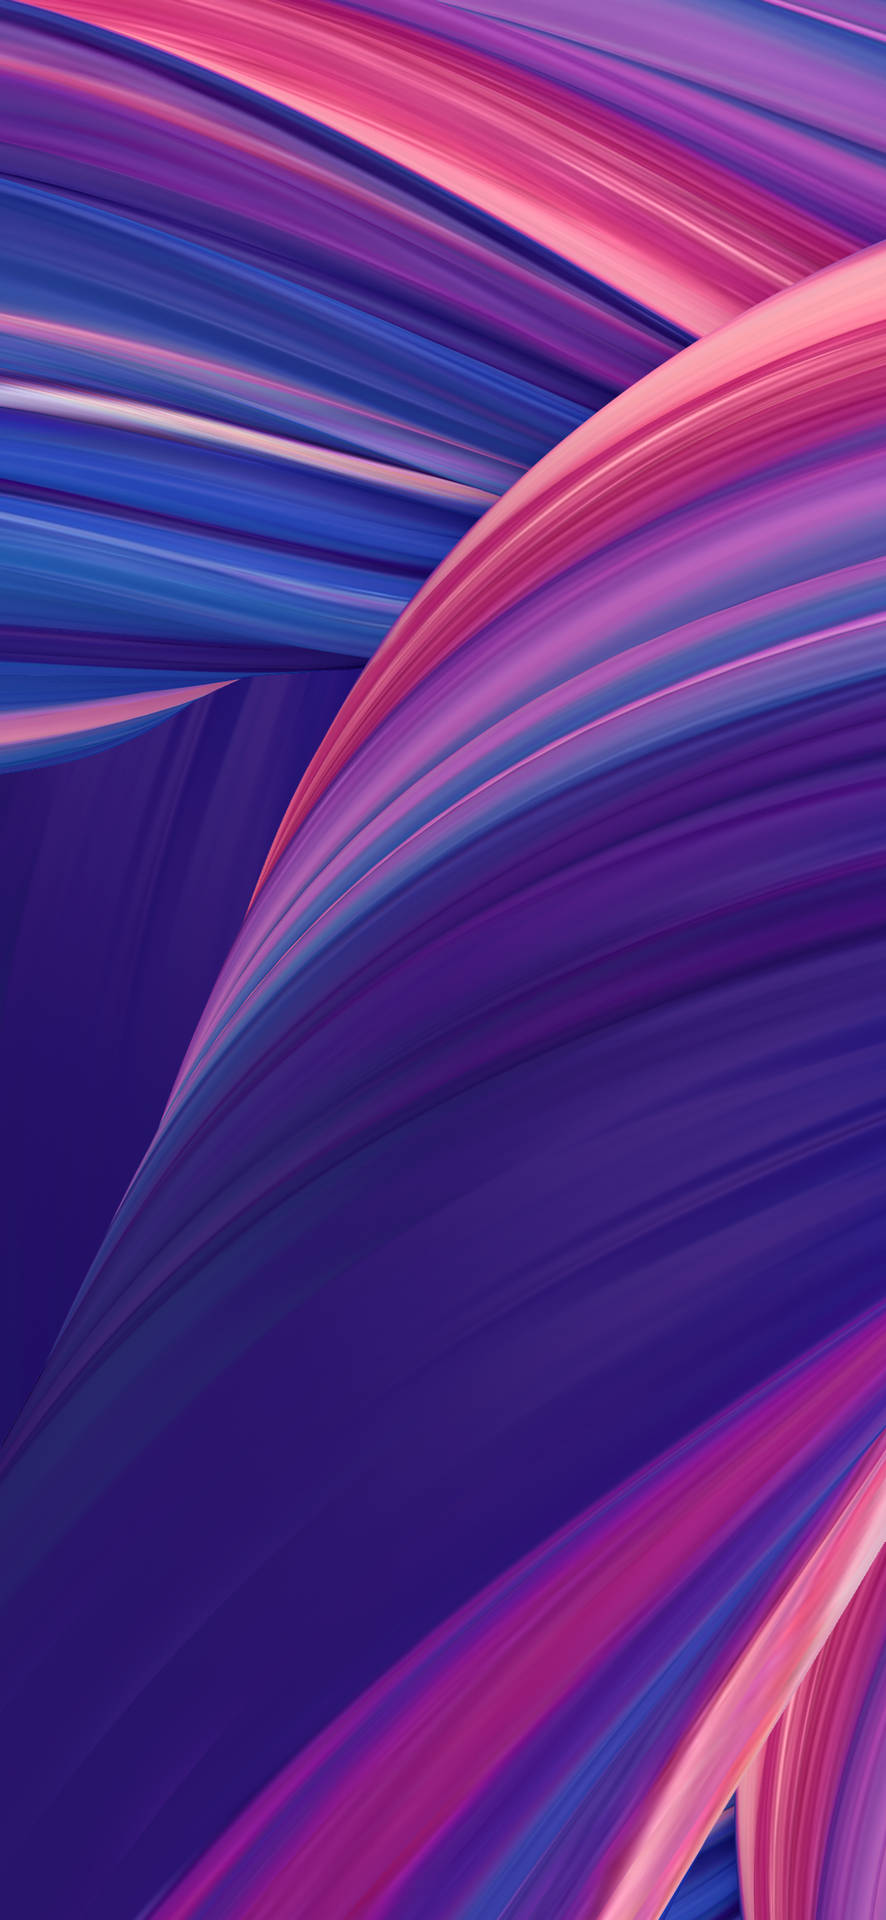 Abstract Purple Pink Swirl Oppo A5s Wallpaper